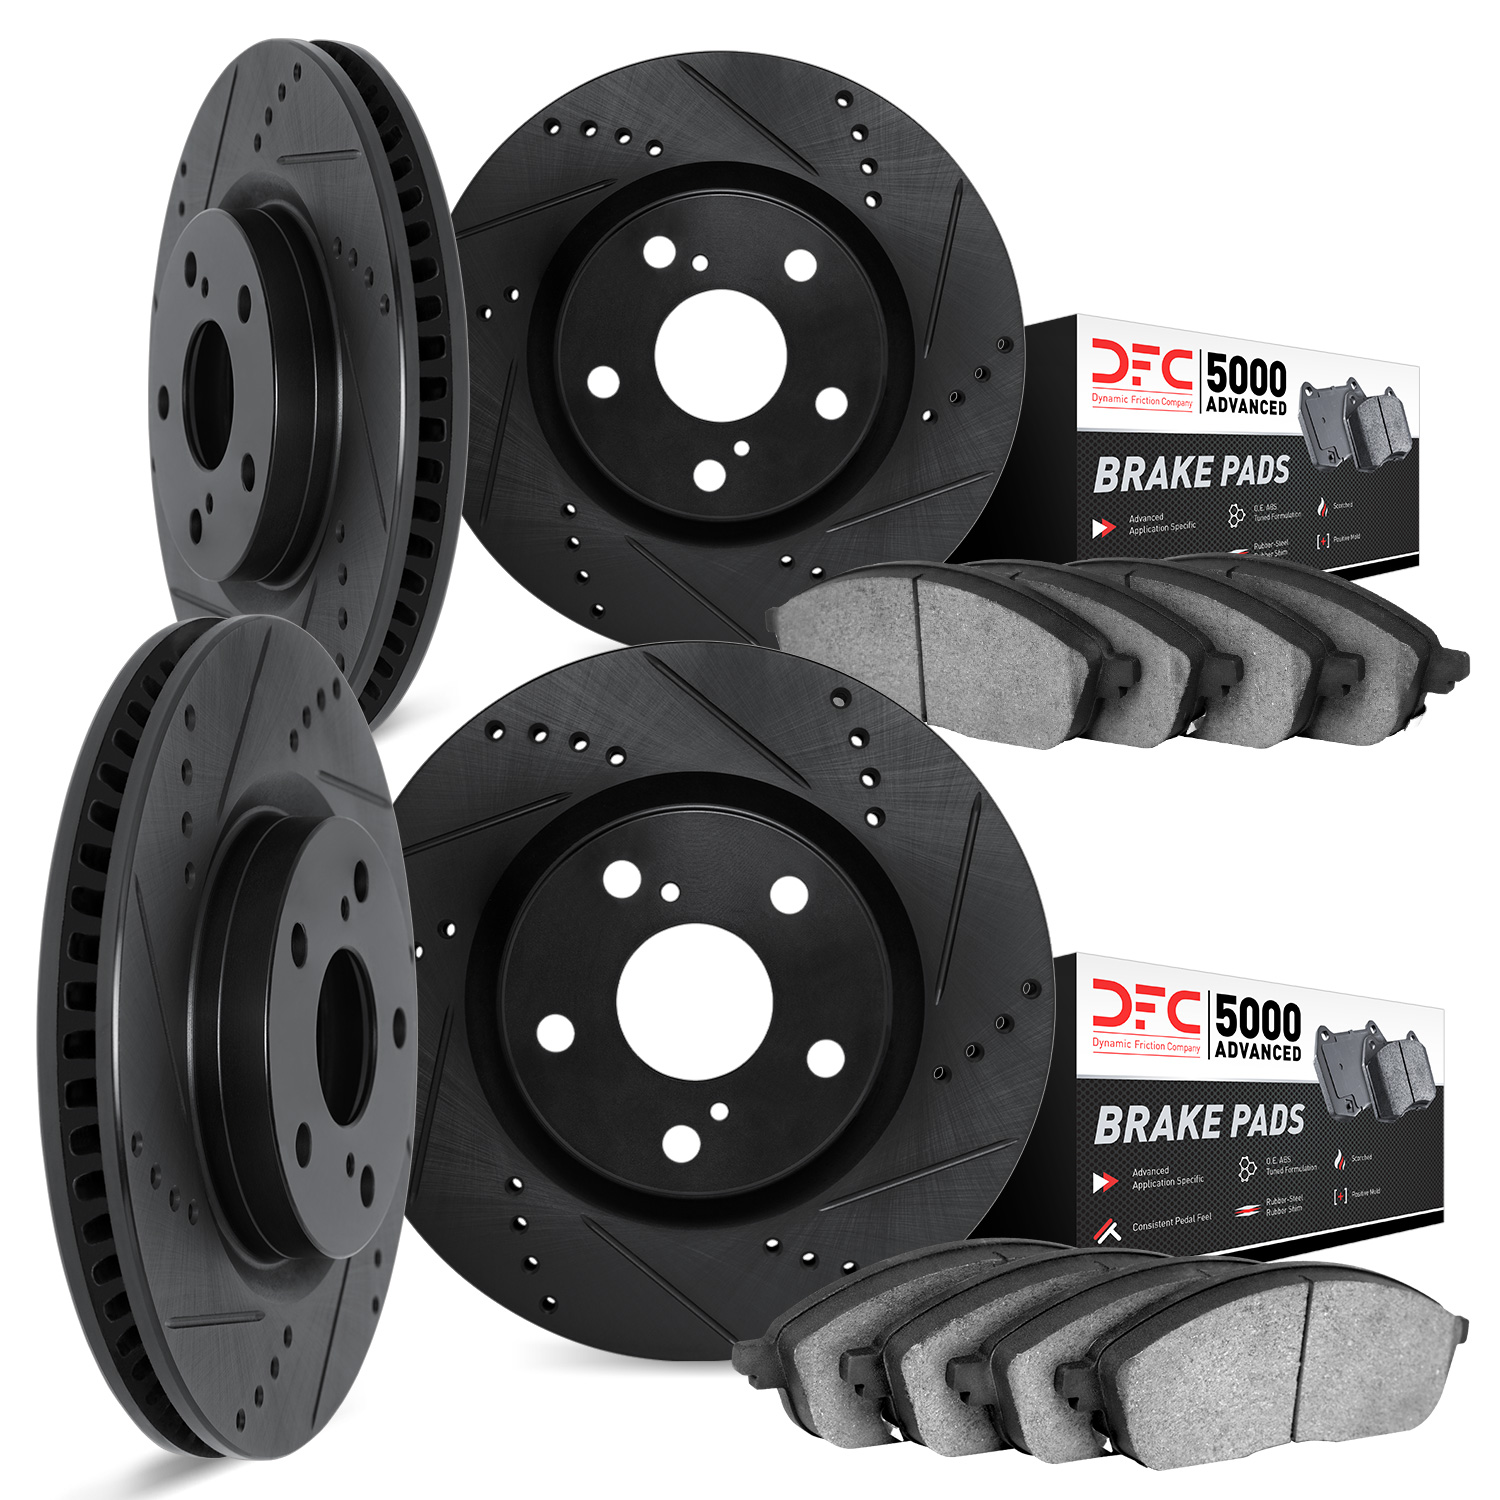 8504-31033 Drilled/Slotted Brake Rotors w/5000 Advanced Brake Pads Kit [Black], 2012-2021 BMW, Position: Front and Rear